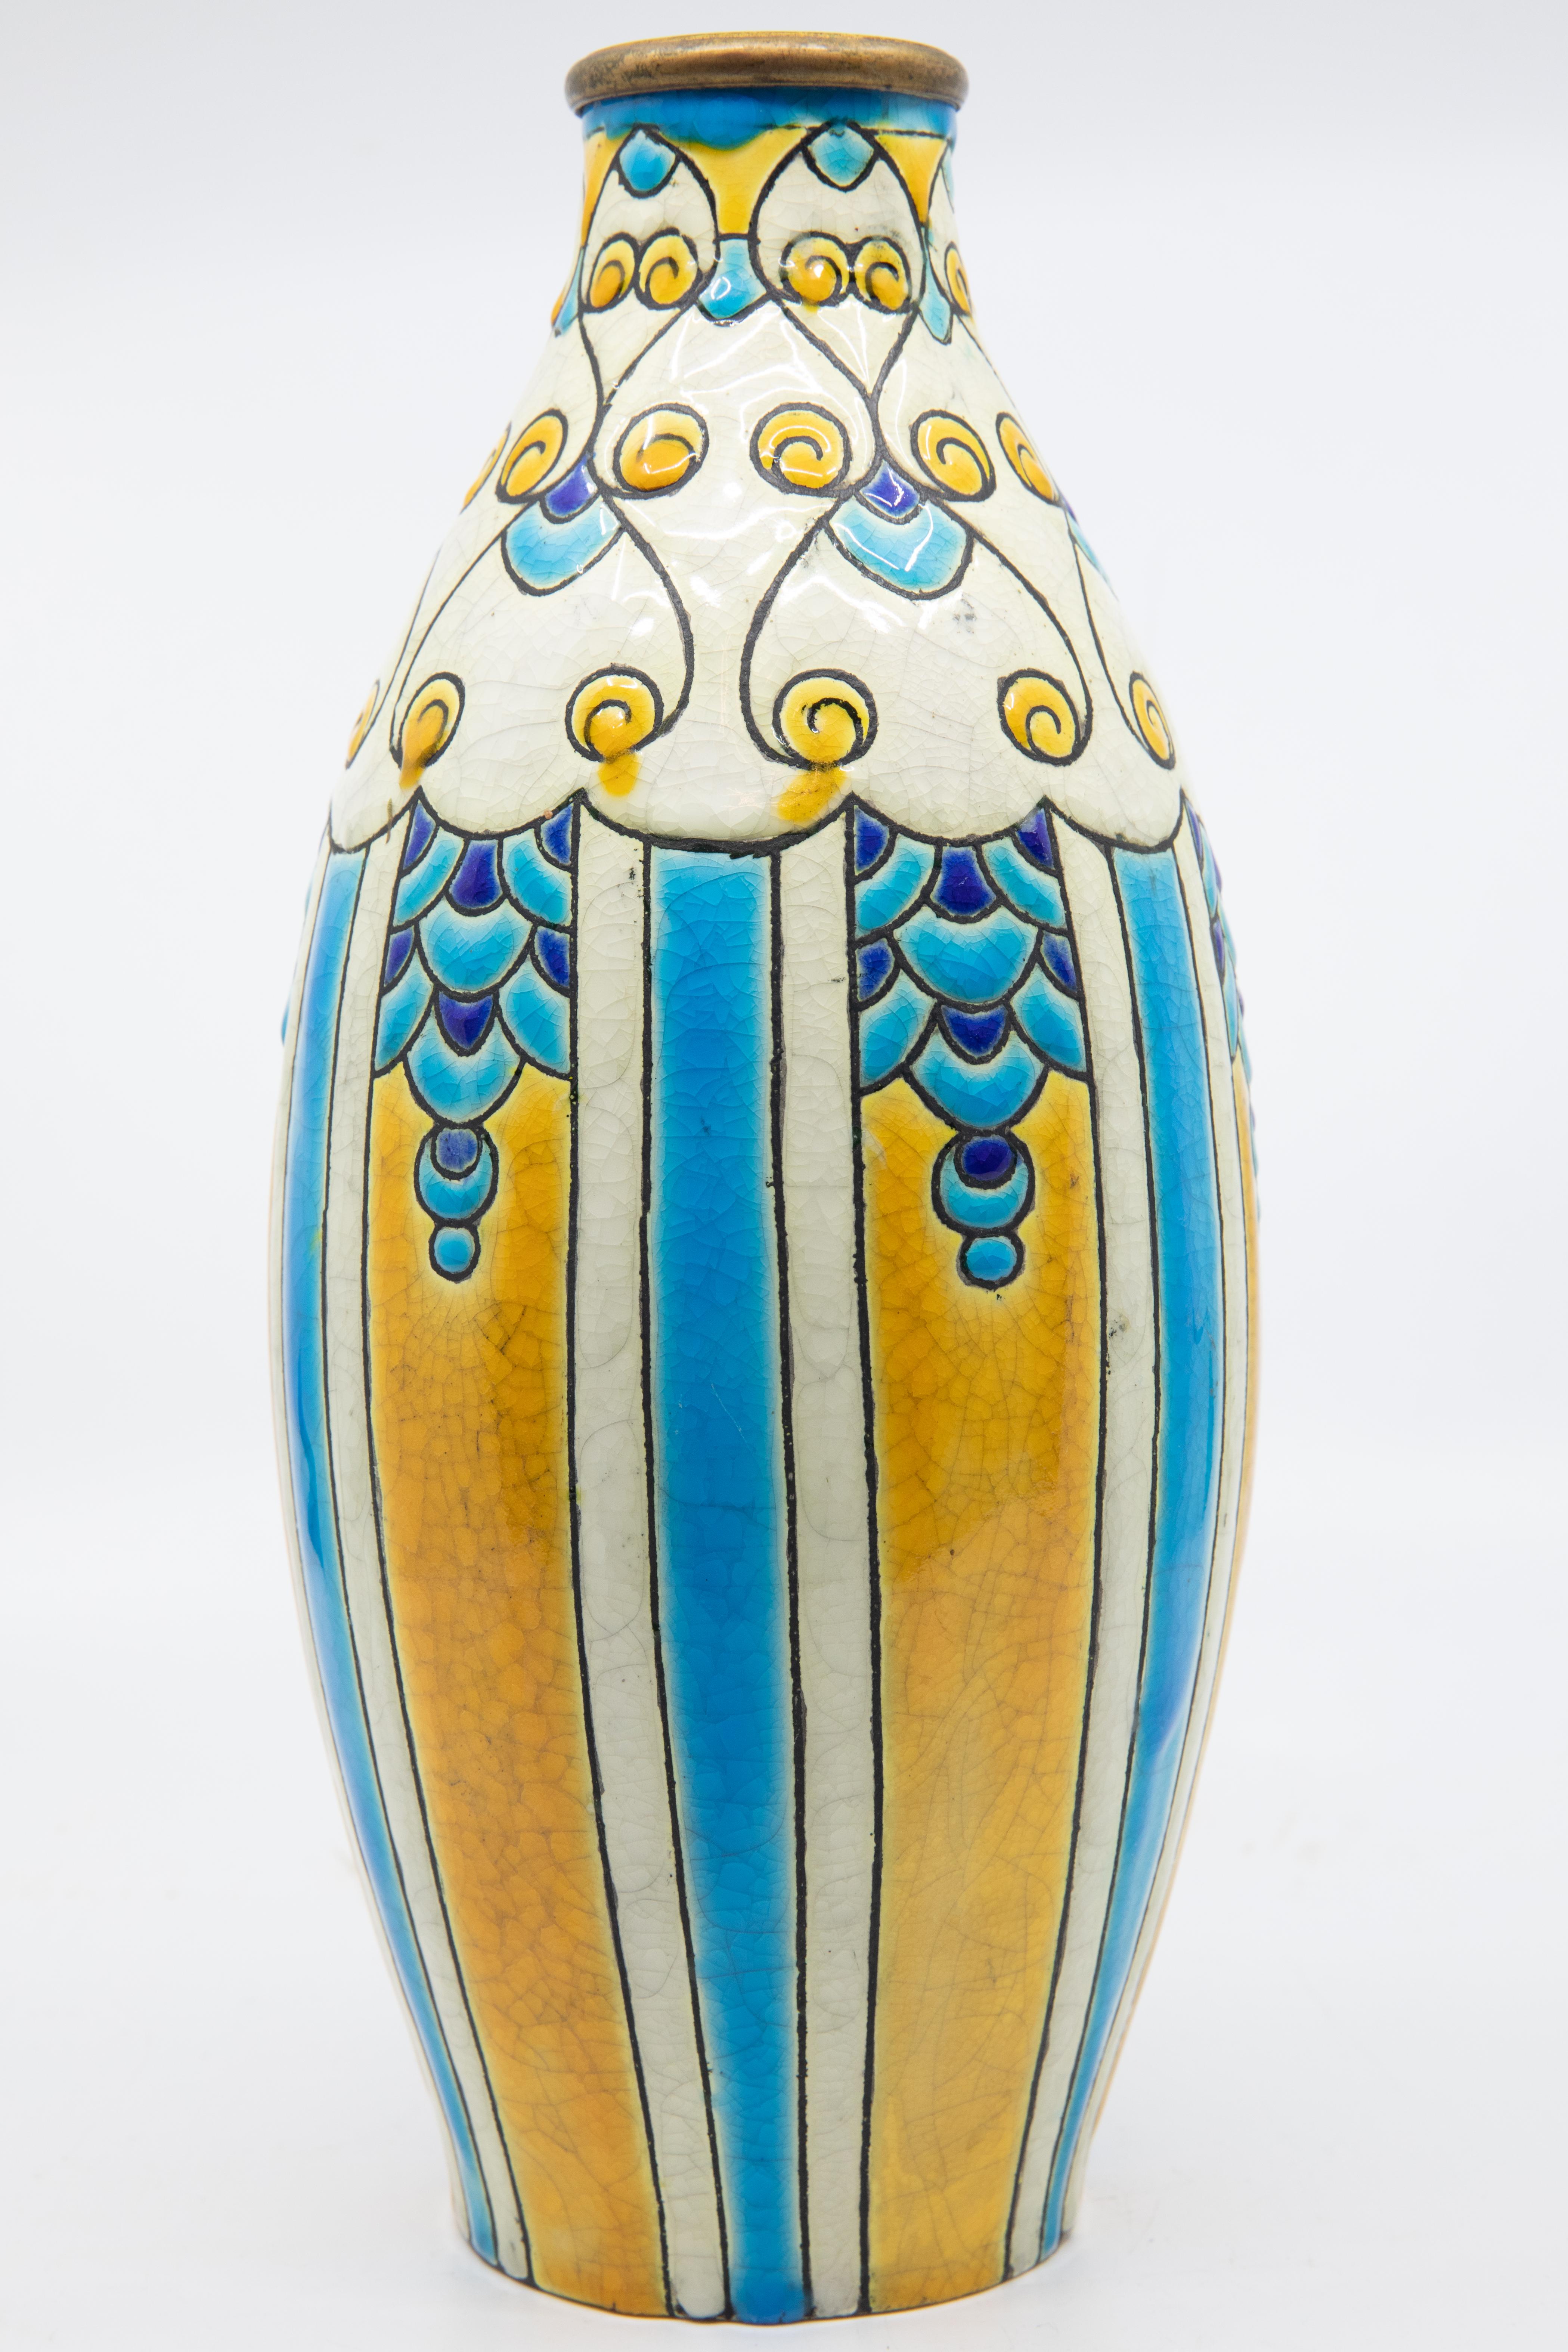 Charles Catteau for Boch Freres enameled Art Deco ceramic vase circa 1924. Charles Catteau Born at Douai, Charles Catteau trained at the National Ceramics School in Sèvres. In 1904, Catteau was hired by the German Nymphenburg Porcelain Factory, near